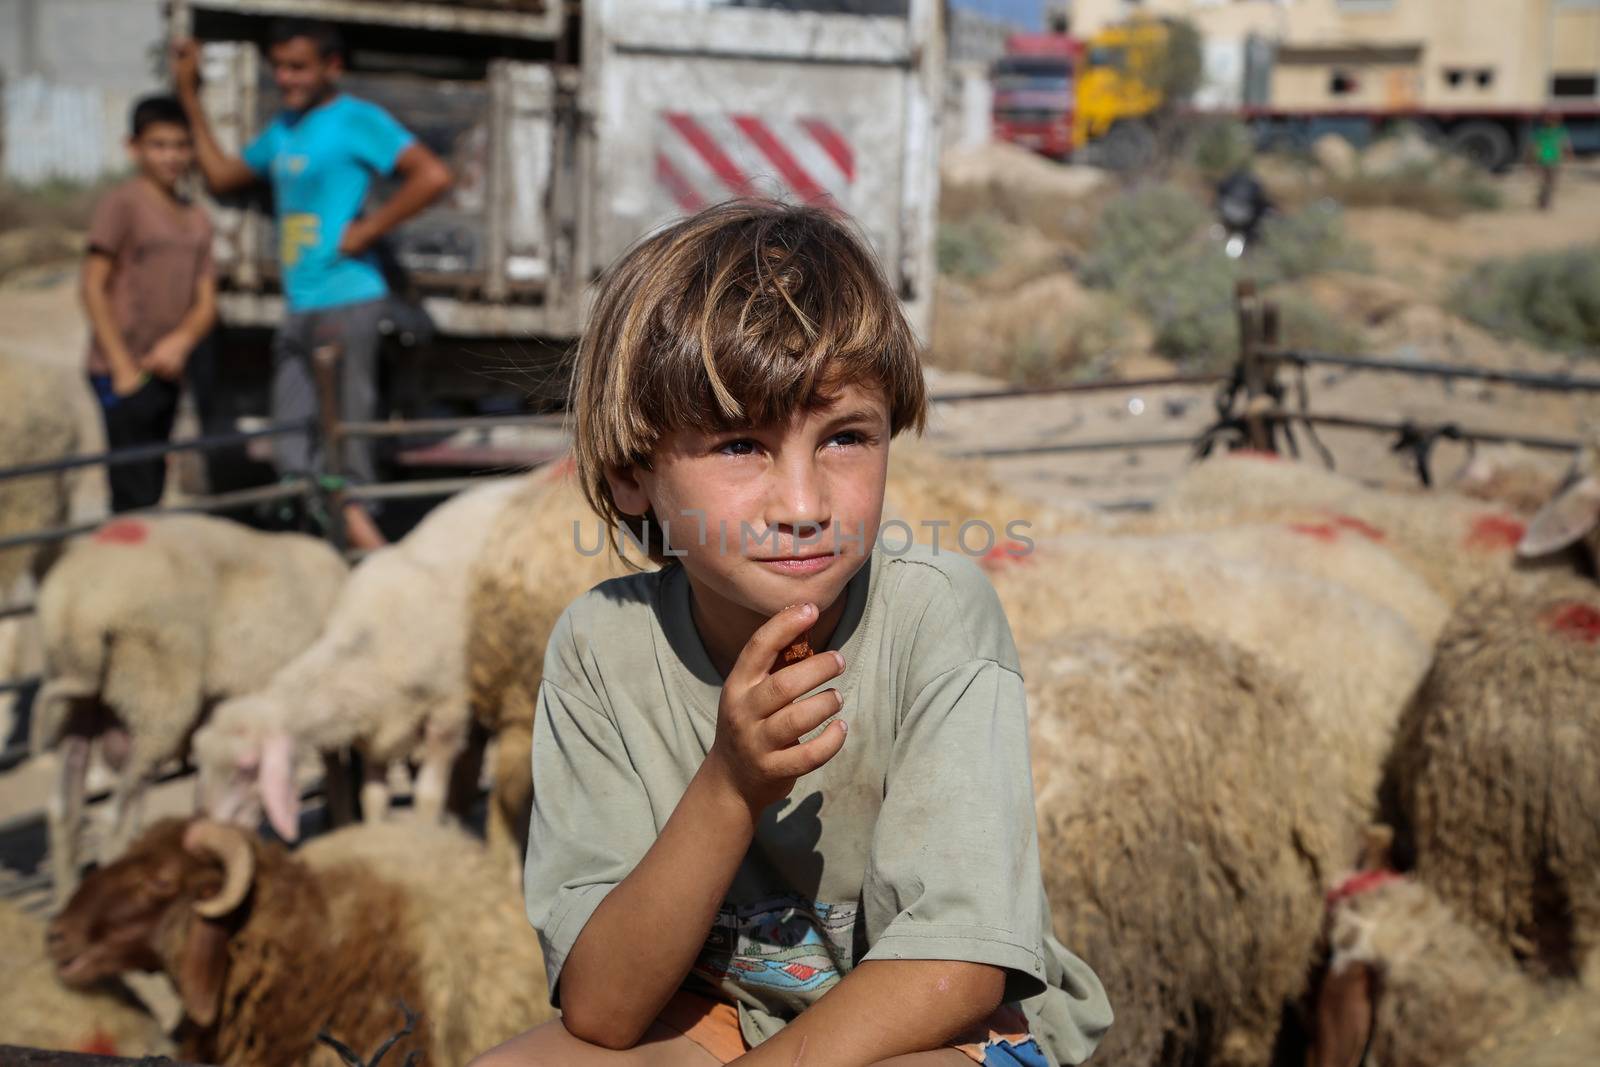 PALESTINE, Gaza: A young boy is pictured at the main livestock market in northern Gaza on September 18, 2015 as Palestinians prepare for the upcoming Eid al-Adha festival.Also known as the Festival of Sacrifice, the three-day holiday marks the end of the annual pilgrimage to Mecca and commemorates the willingness of the Prophet Ibrahim (Abraham to Christians and Jews) to sacrifice his son, Ismail, on God's command. 